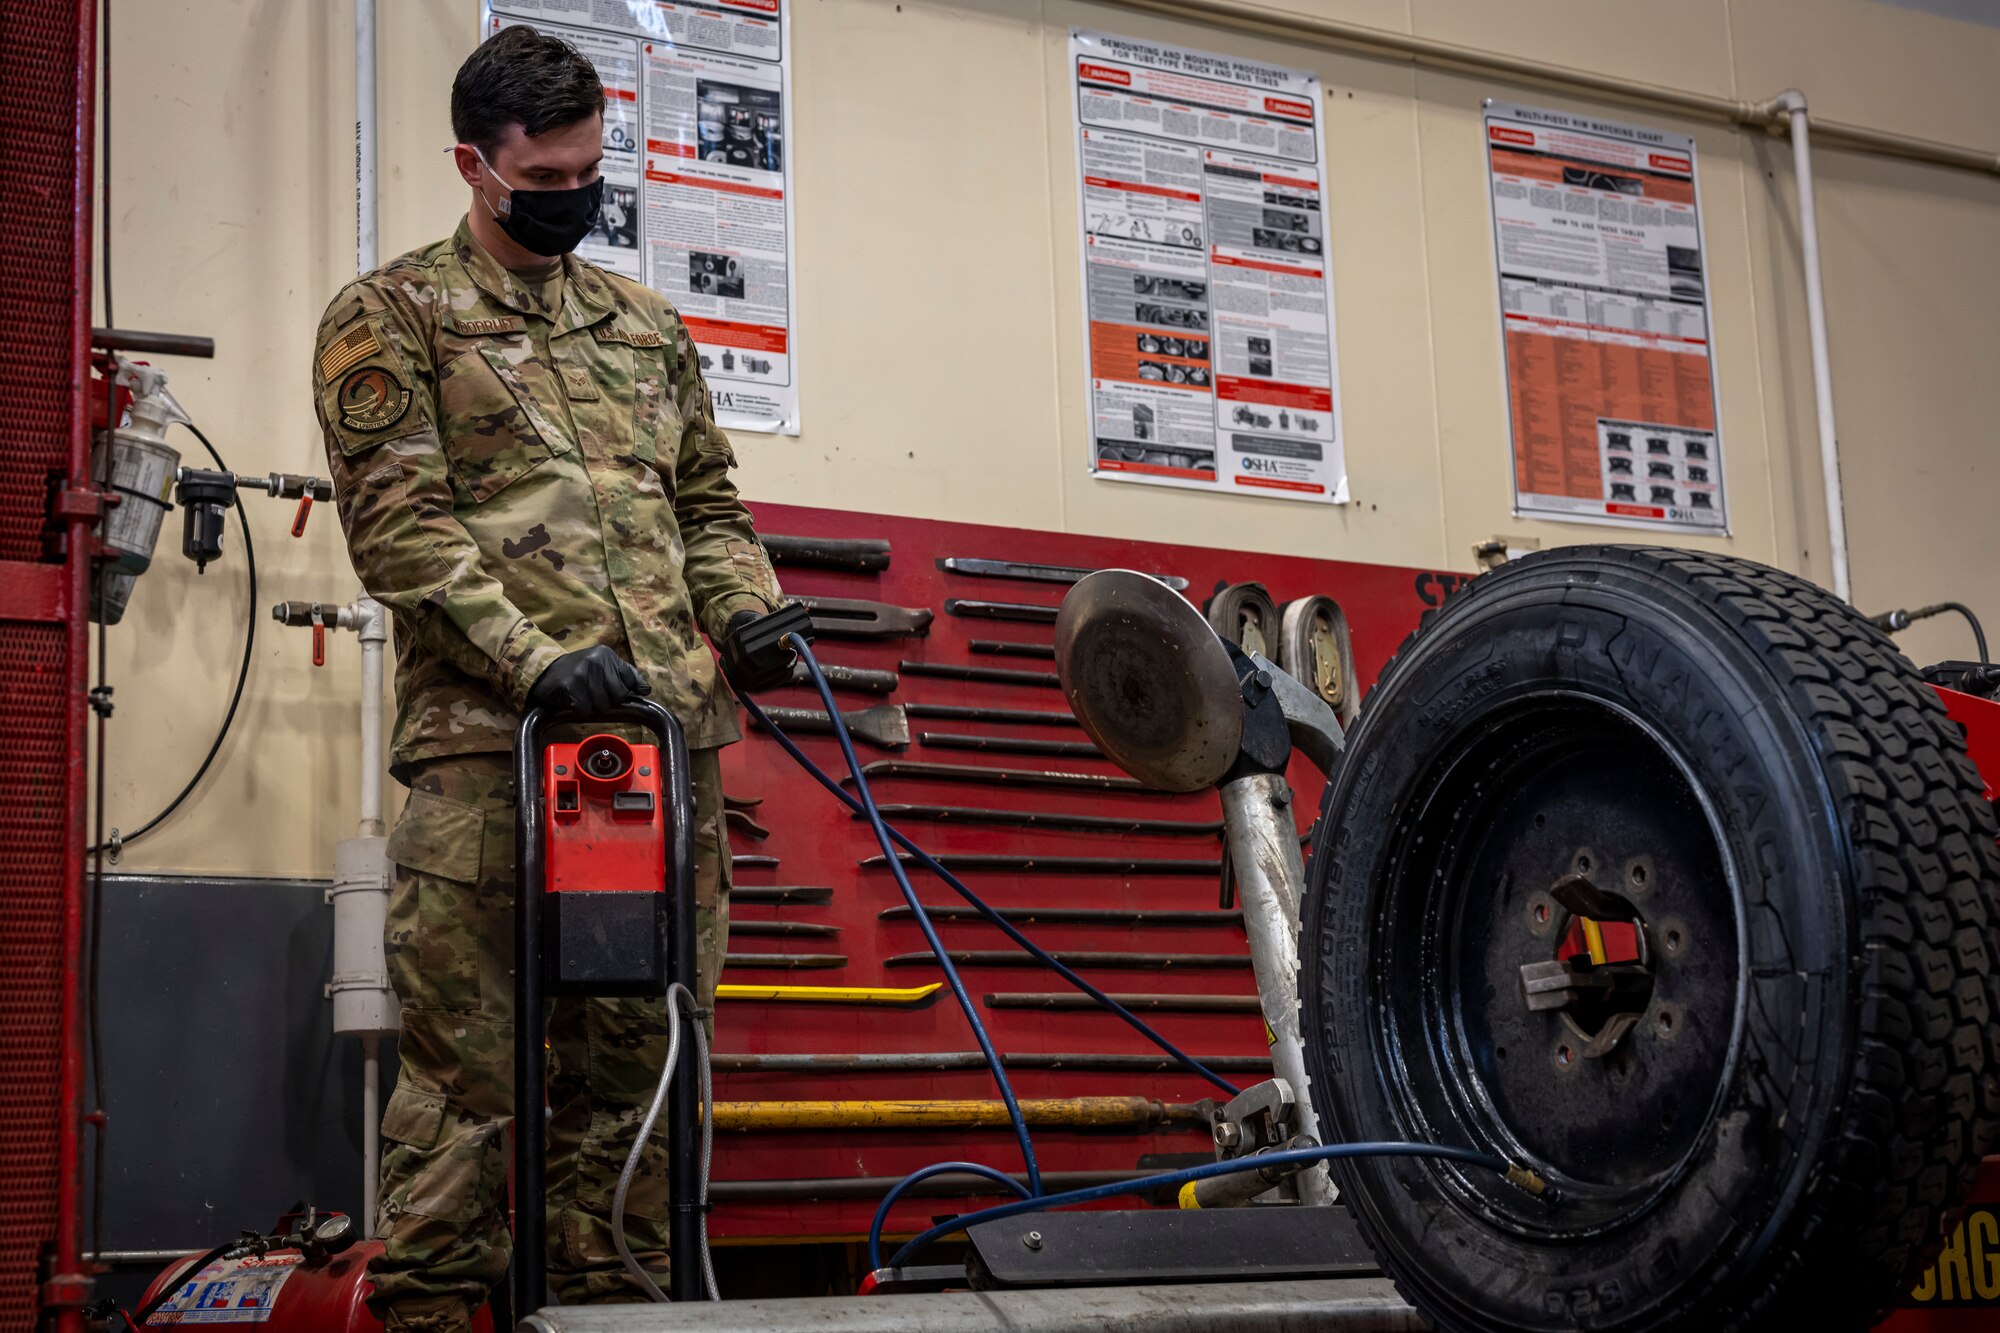 Airman inflating tire with air.